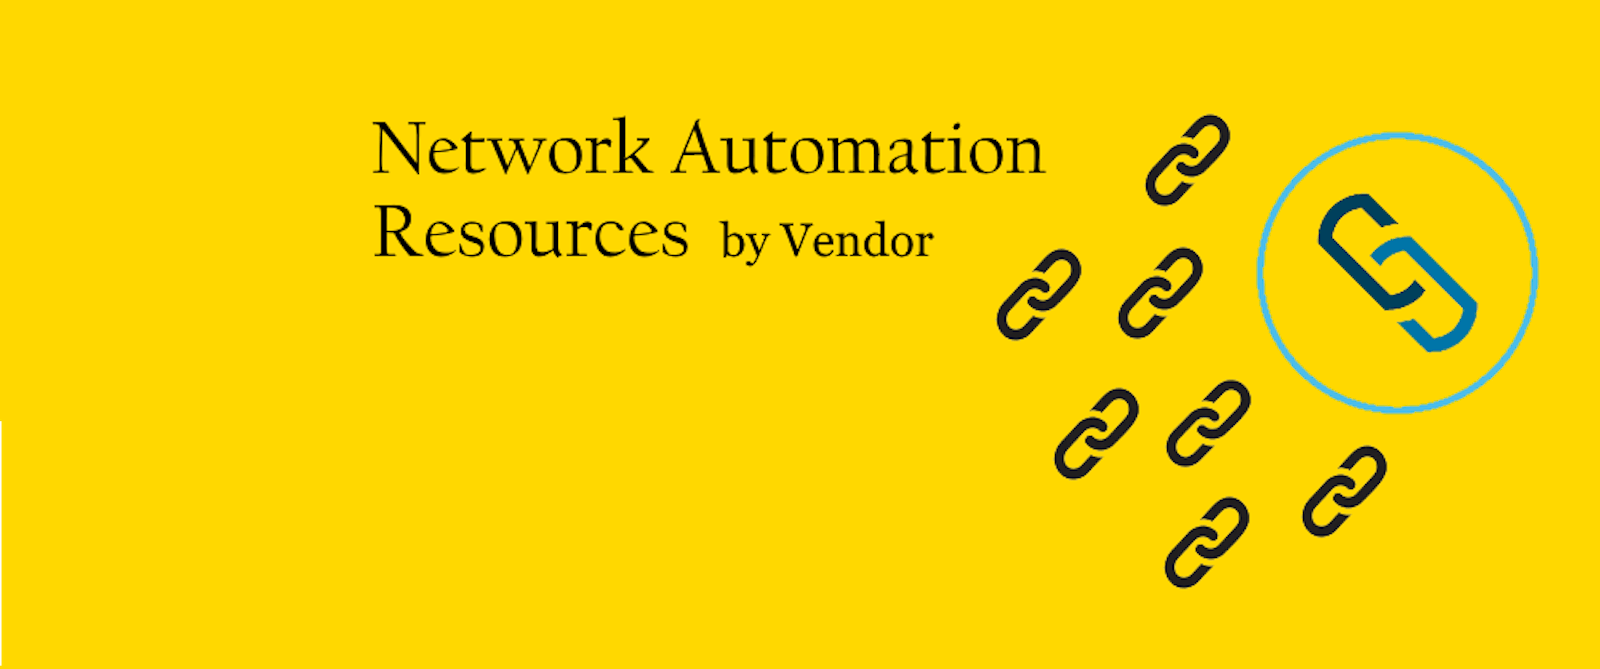 Network Automation Resources